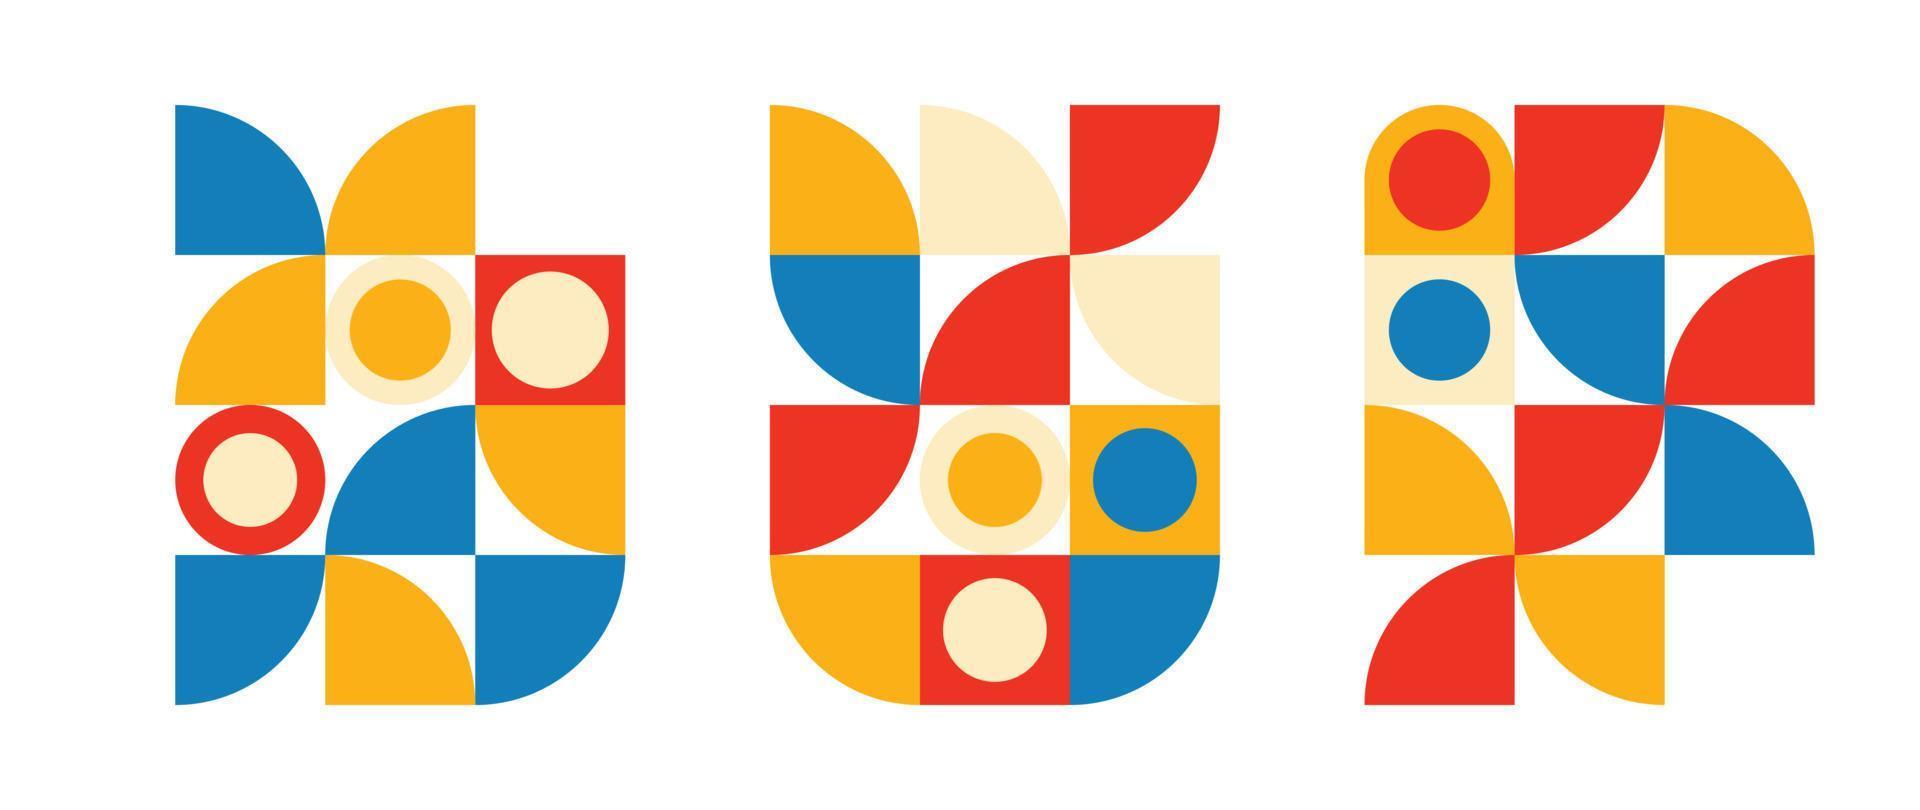 Set of geometric pattern element in mid-century style. Retro abstract collection of colorful red, yellow, blue circle and square shapes. Modern design for cover, business card, poster, wall art. vector